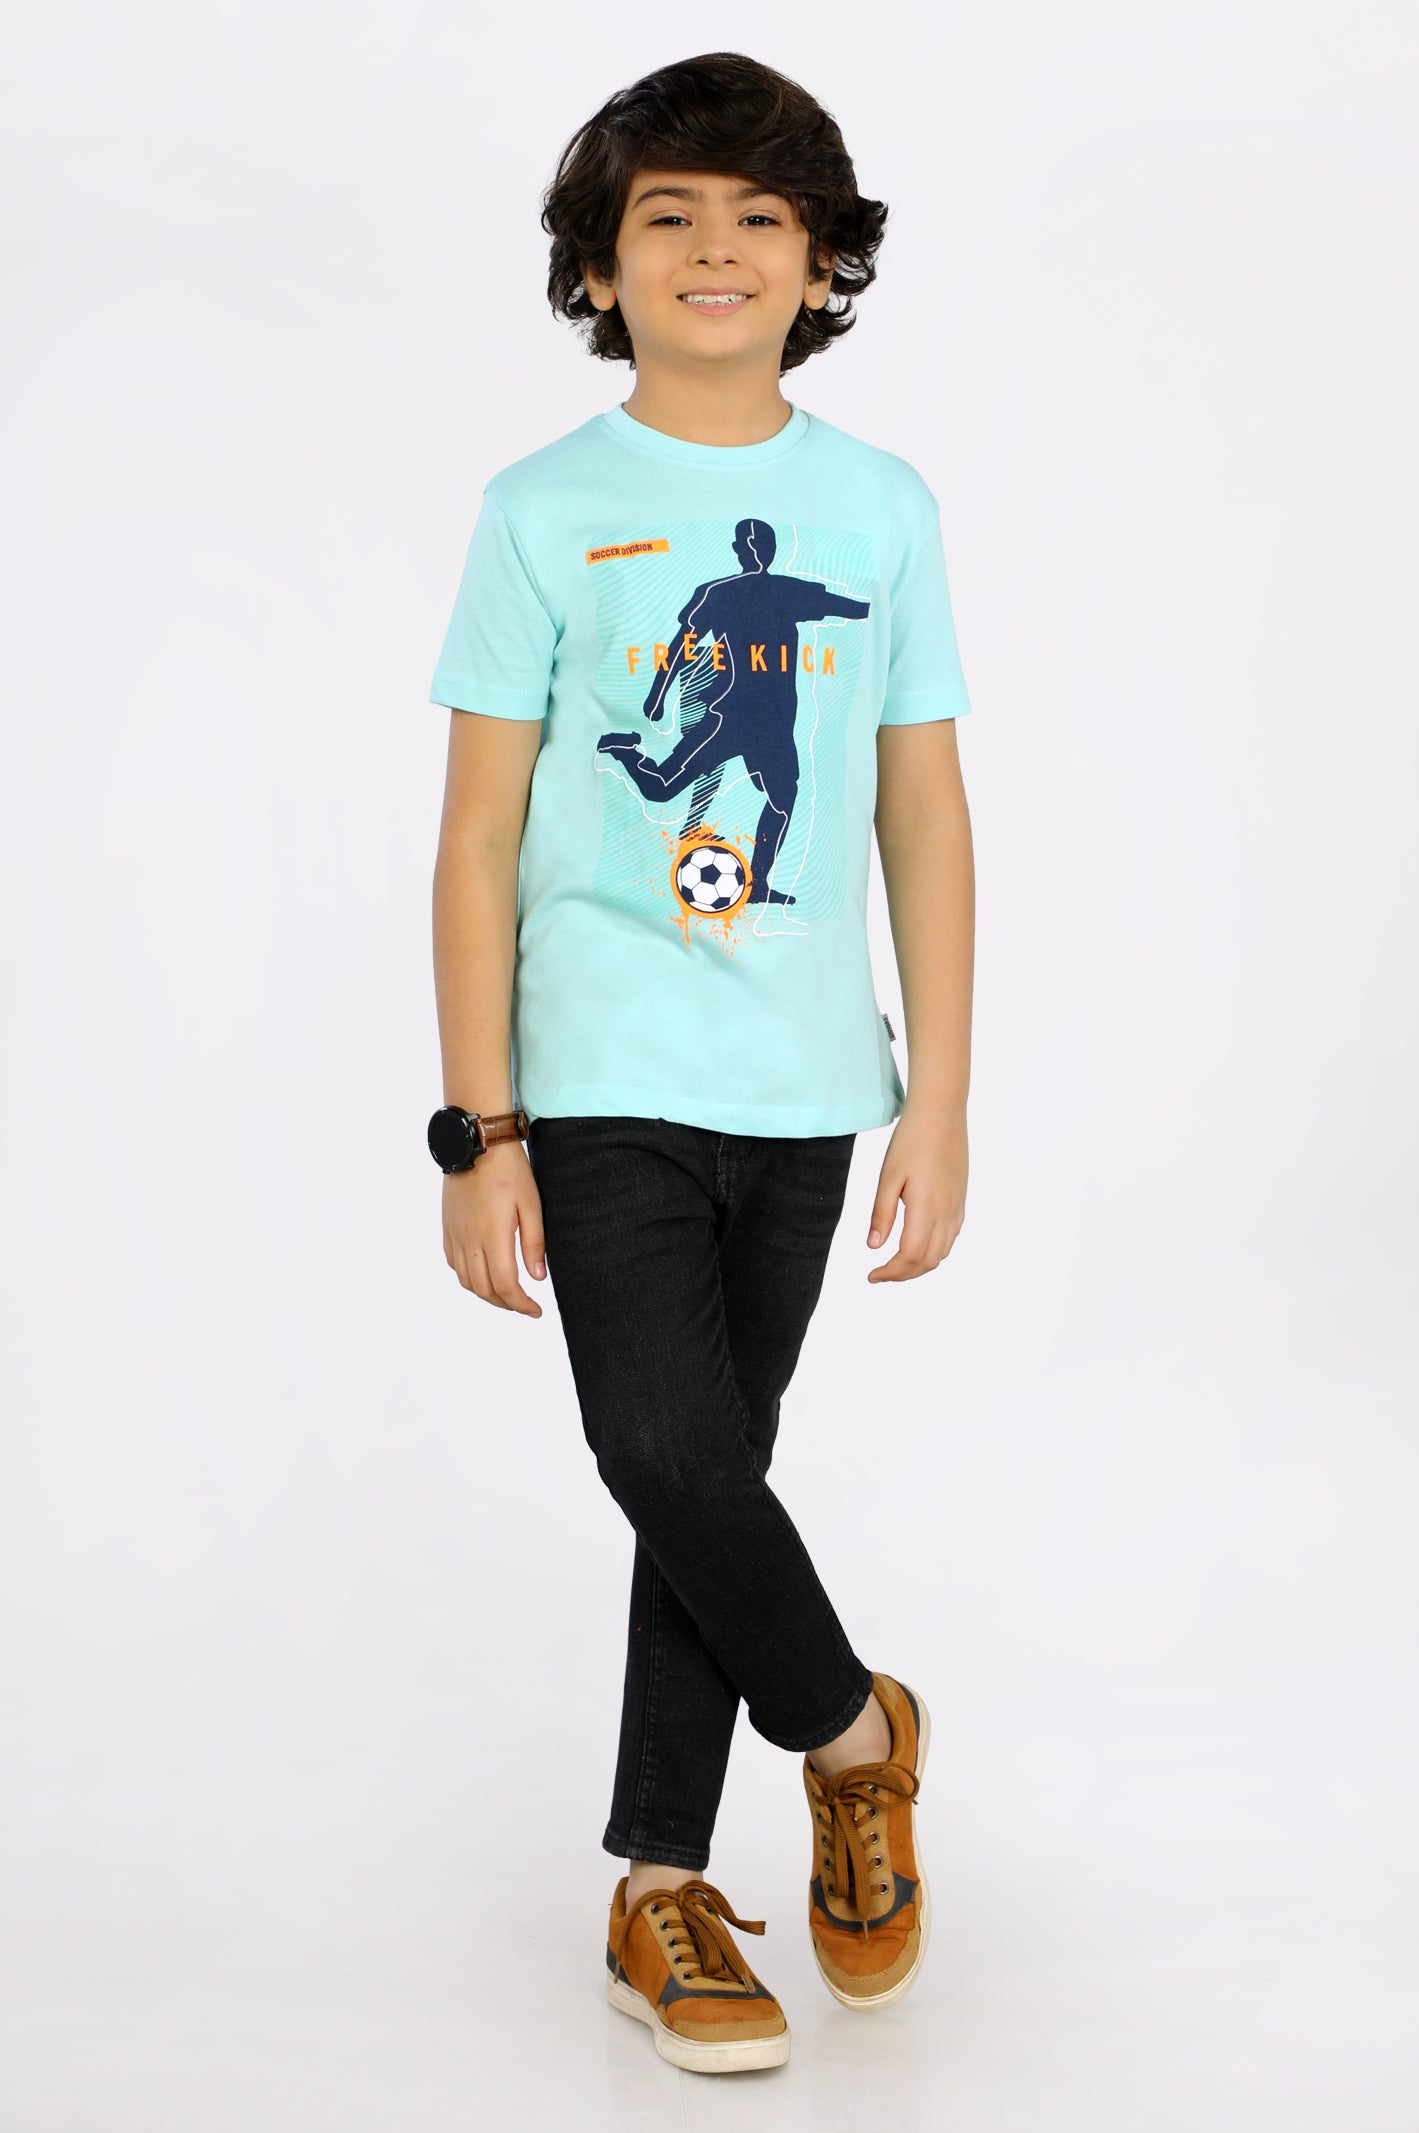 Soccer Print T-Shirt From Diners